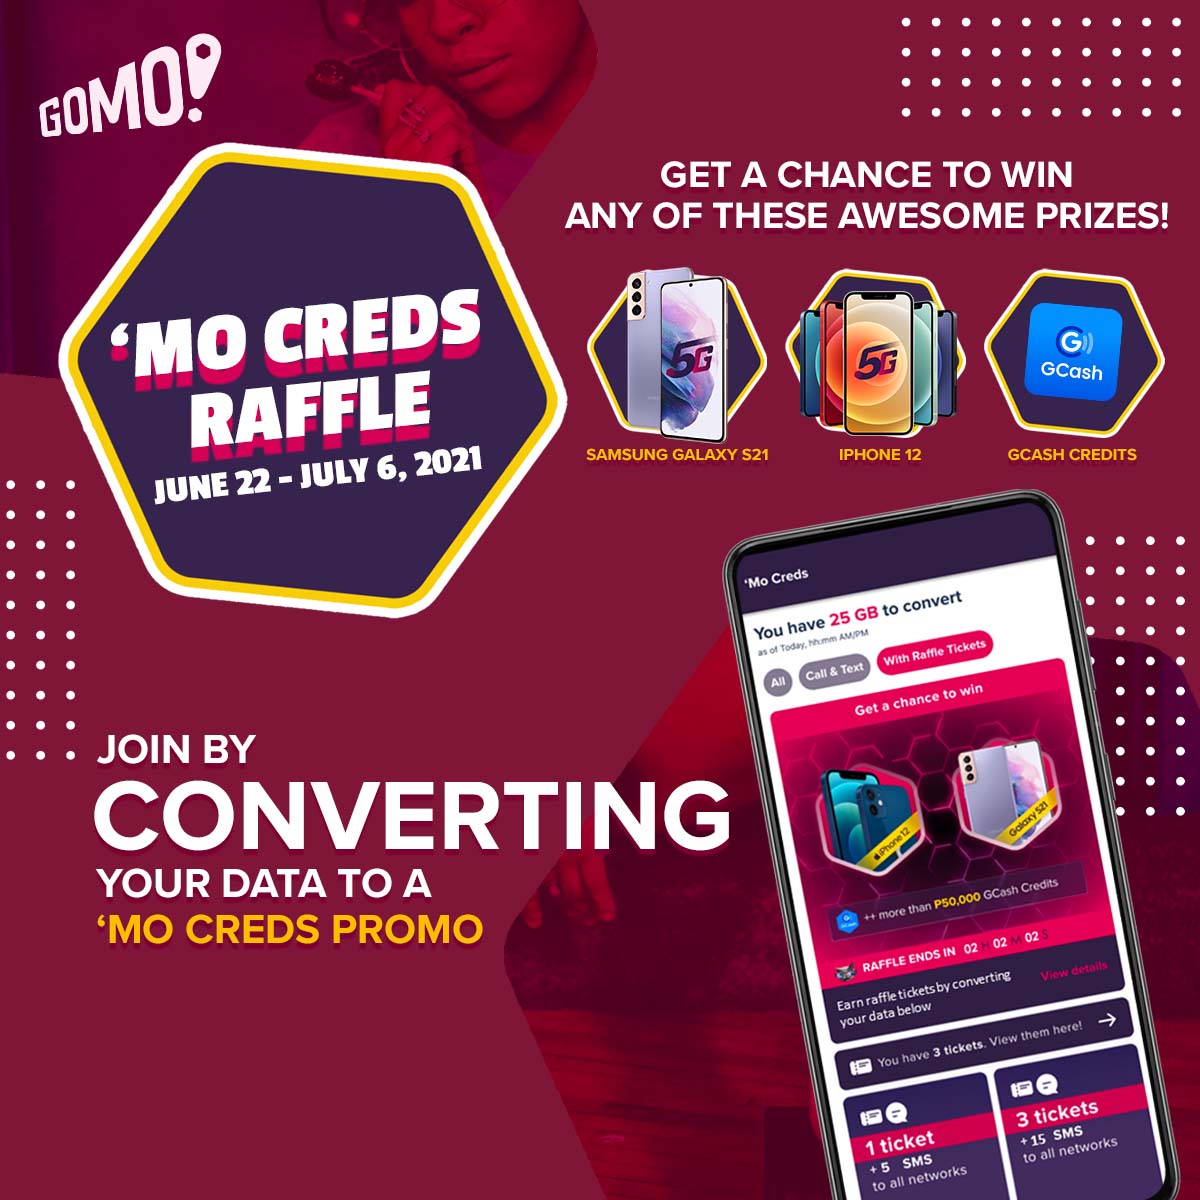 GOMO launches ‘Mo Creds raffle to let you do more with your data!